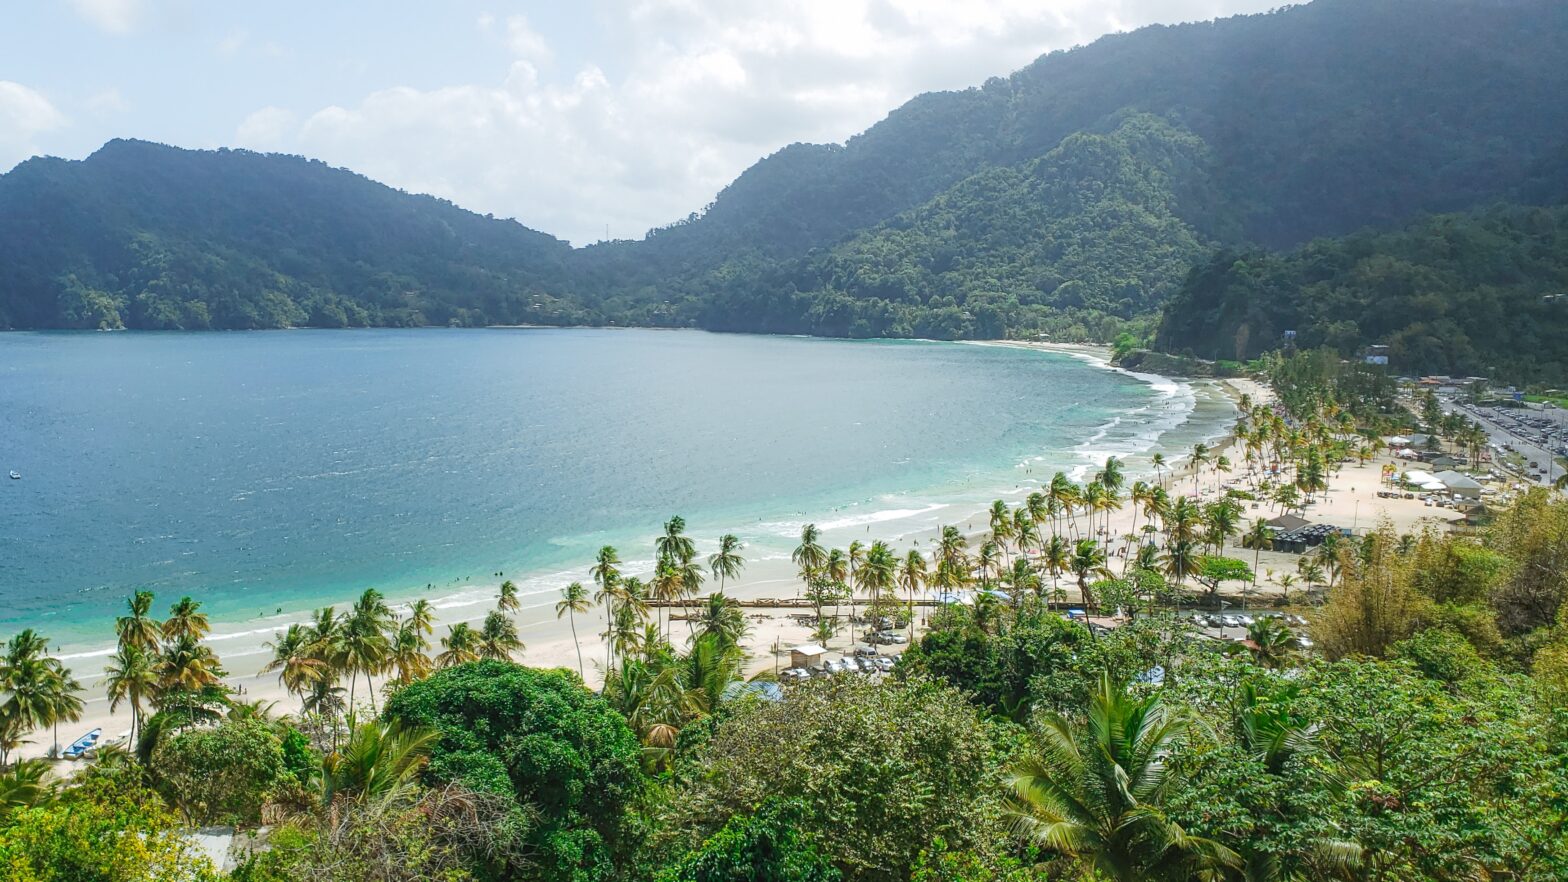 Going To Trinidad and Tobago? These 4 Natural Sites Are Worth A Visit